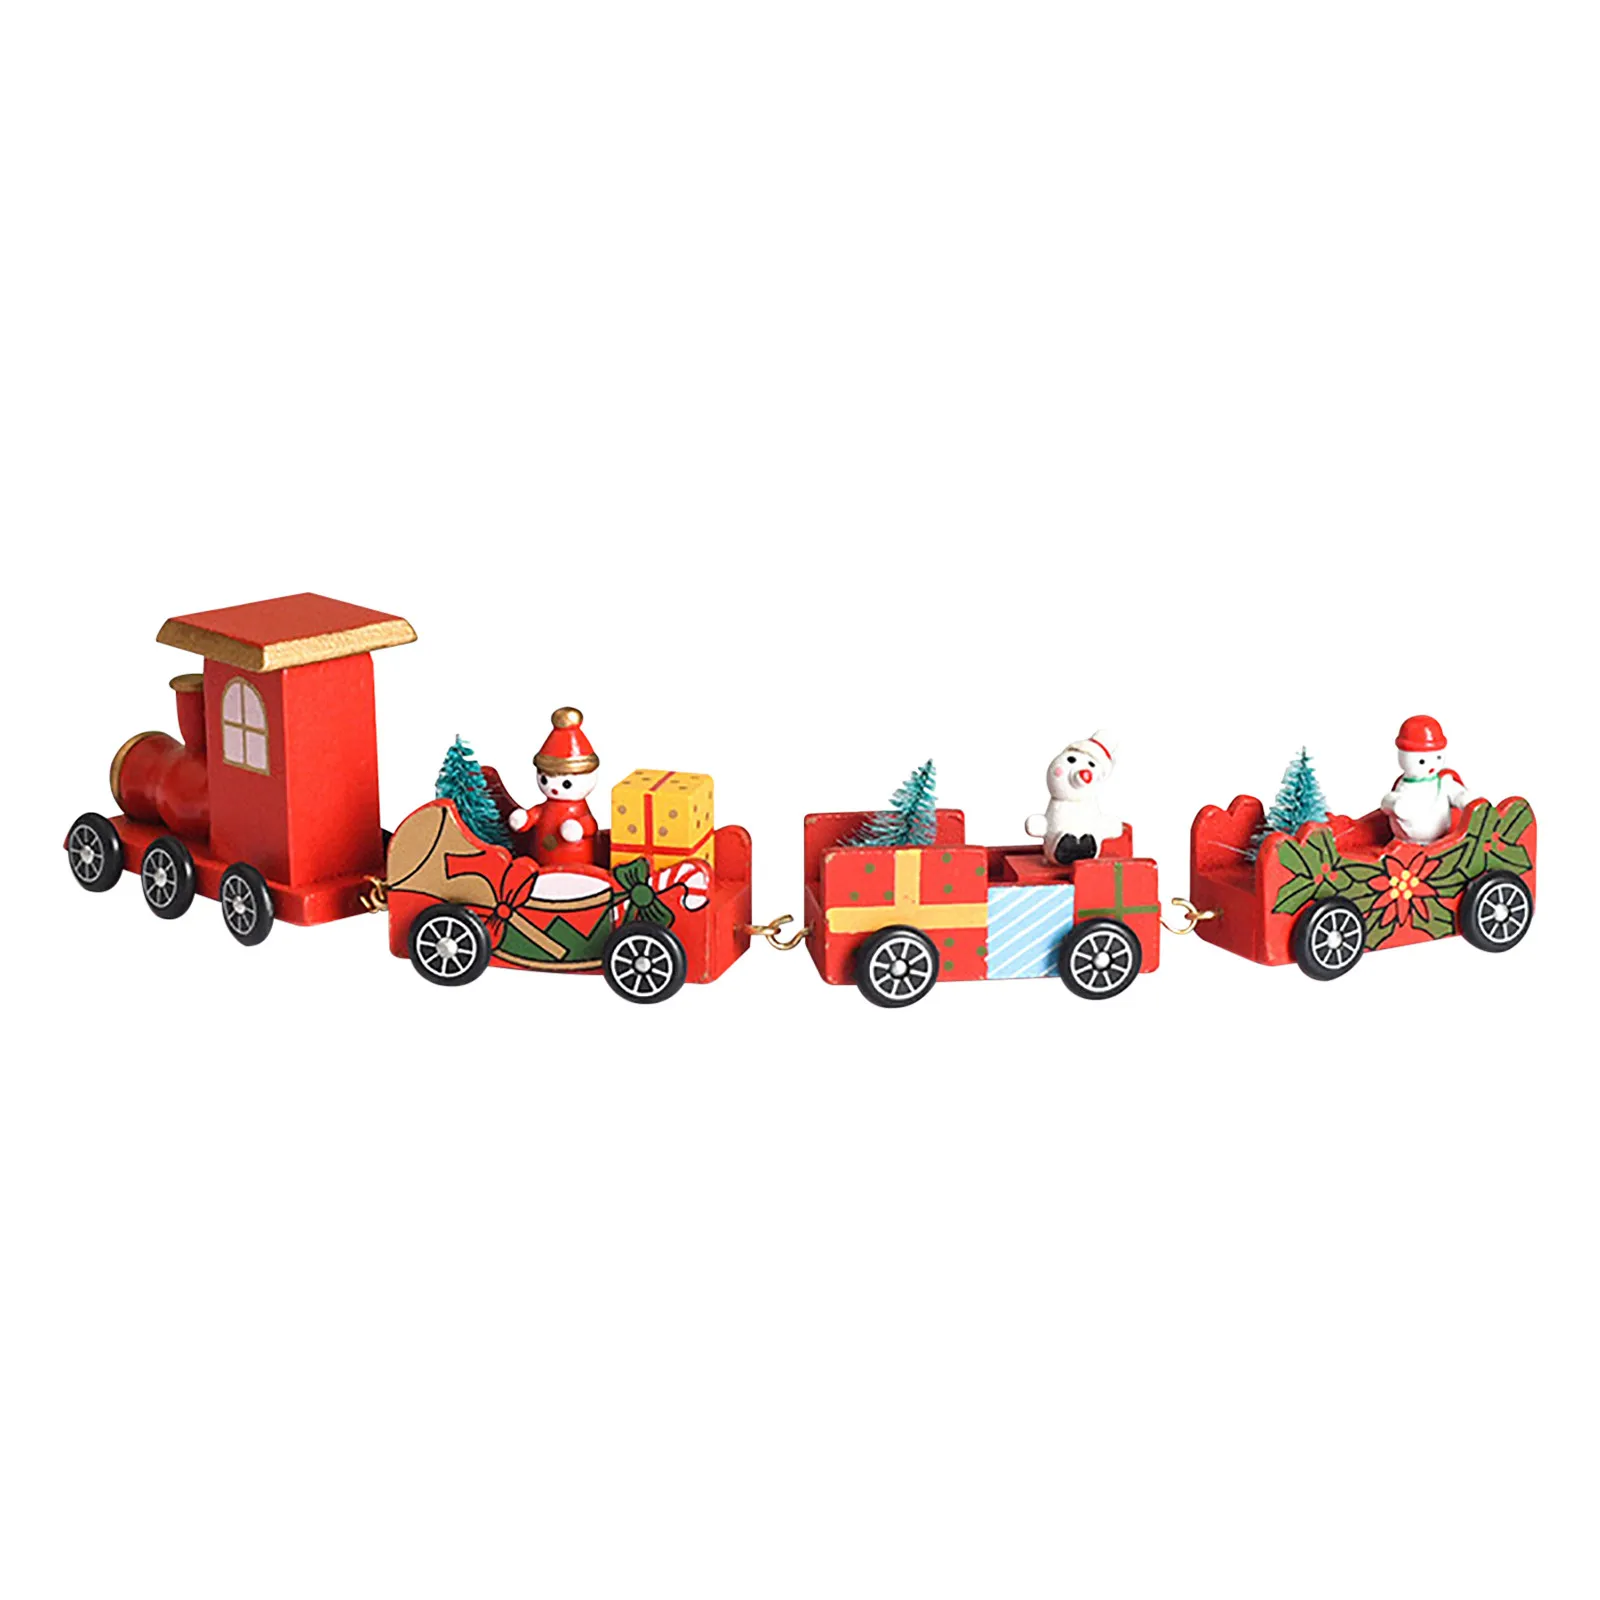 YQWEARLL Christmas Train Painted Wooden Christmas Decoration Kid Gift Toys,Xmas Table Top Ornament,Mini Locomotive Embellishments for Festival Present Christmas Party Decoration for 3+Year 